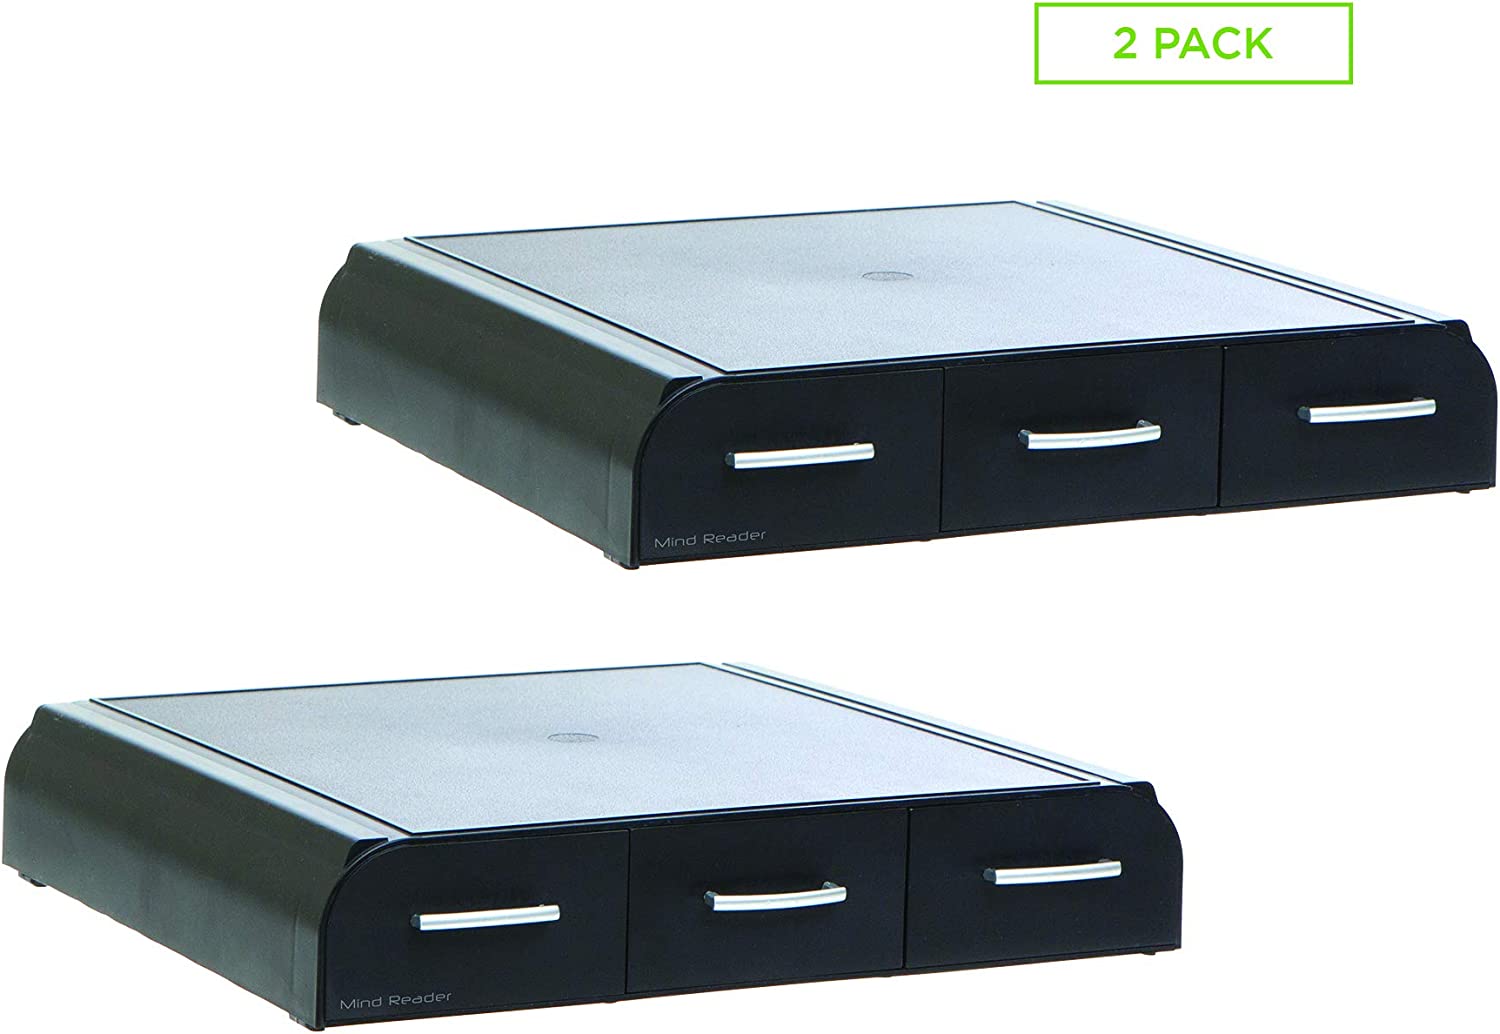 2-Pack Mind Reader Laptop or Monitor Stand w/ 3 Drawers $16.19 ($8.09 each) + Free Shipping w/Prime or on orders over $25